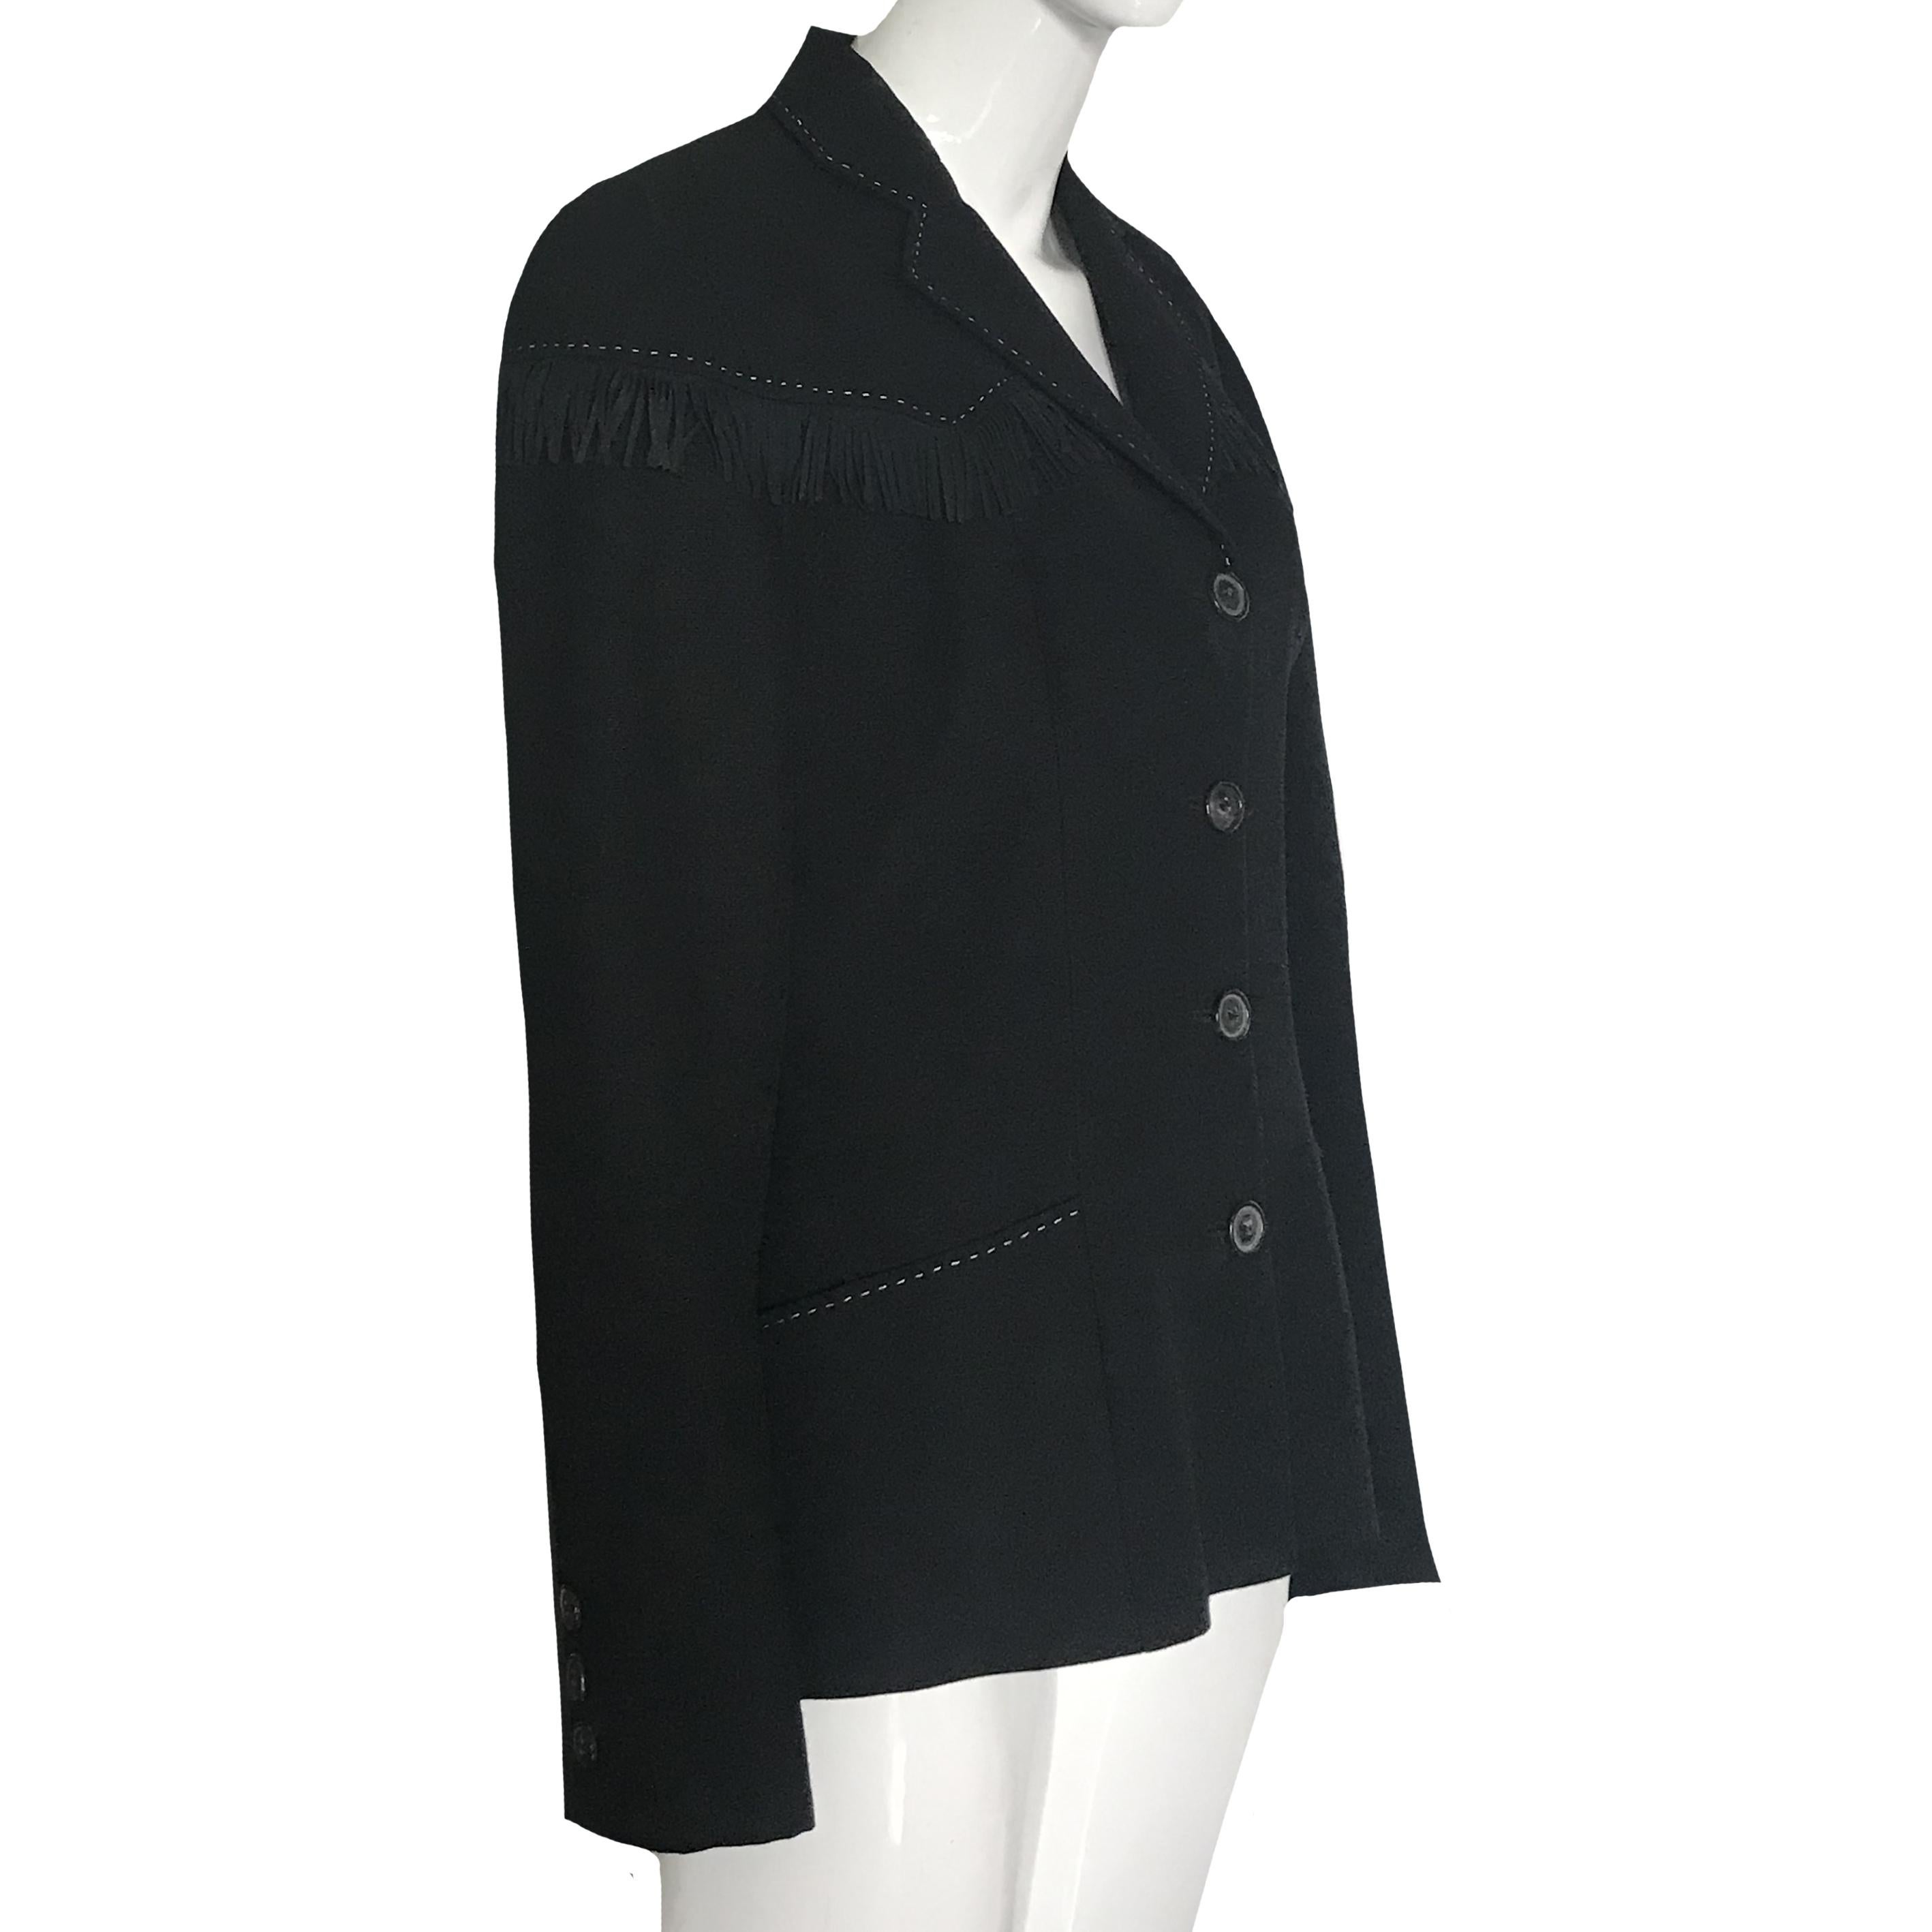 CHANTAL THOMASS Fall 1993 Black tailored jacket

Tag CHANTAL THOMASS

Size M

Measurements: Shoulder: 47cm

Length: 60cm

Sleeve: 50cm

Chest 47cm

Material: 100% Wool

Lining: 100% acetate

Fringes: 60% nylon/ 40% spandex

2 pockets on the front/